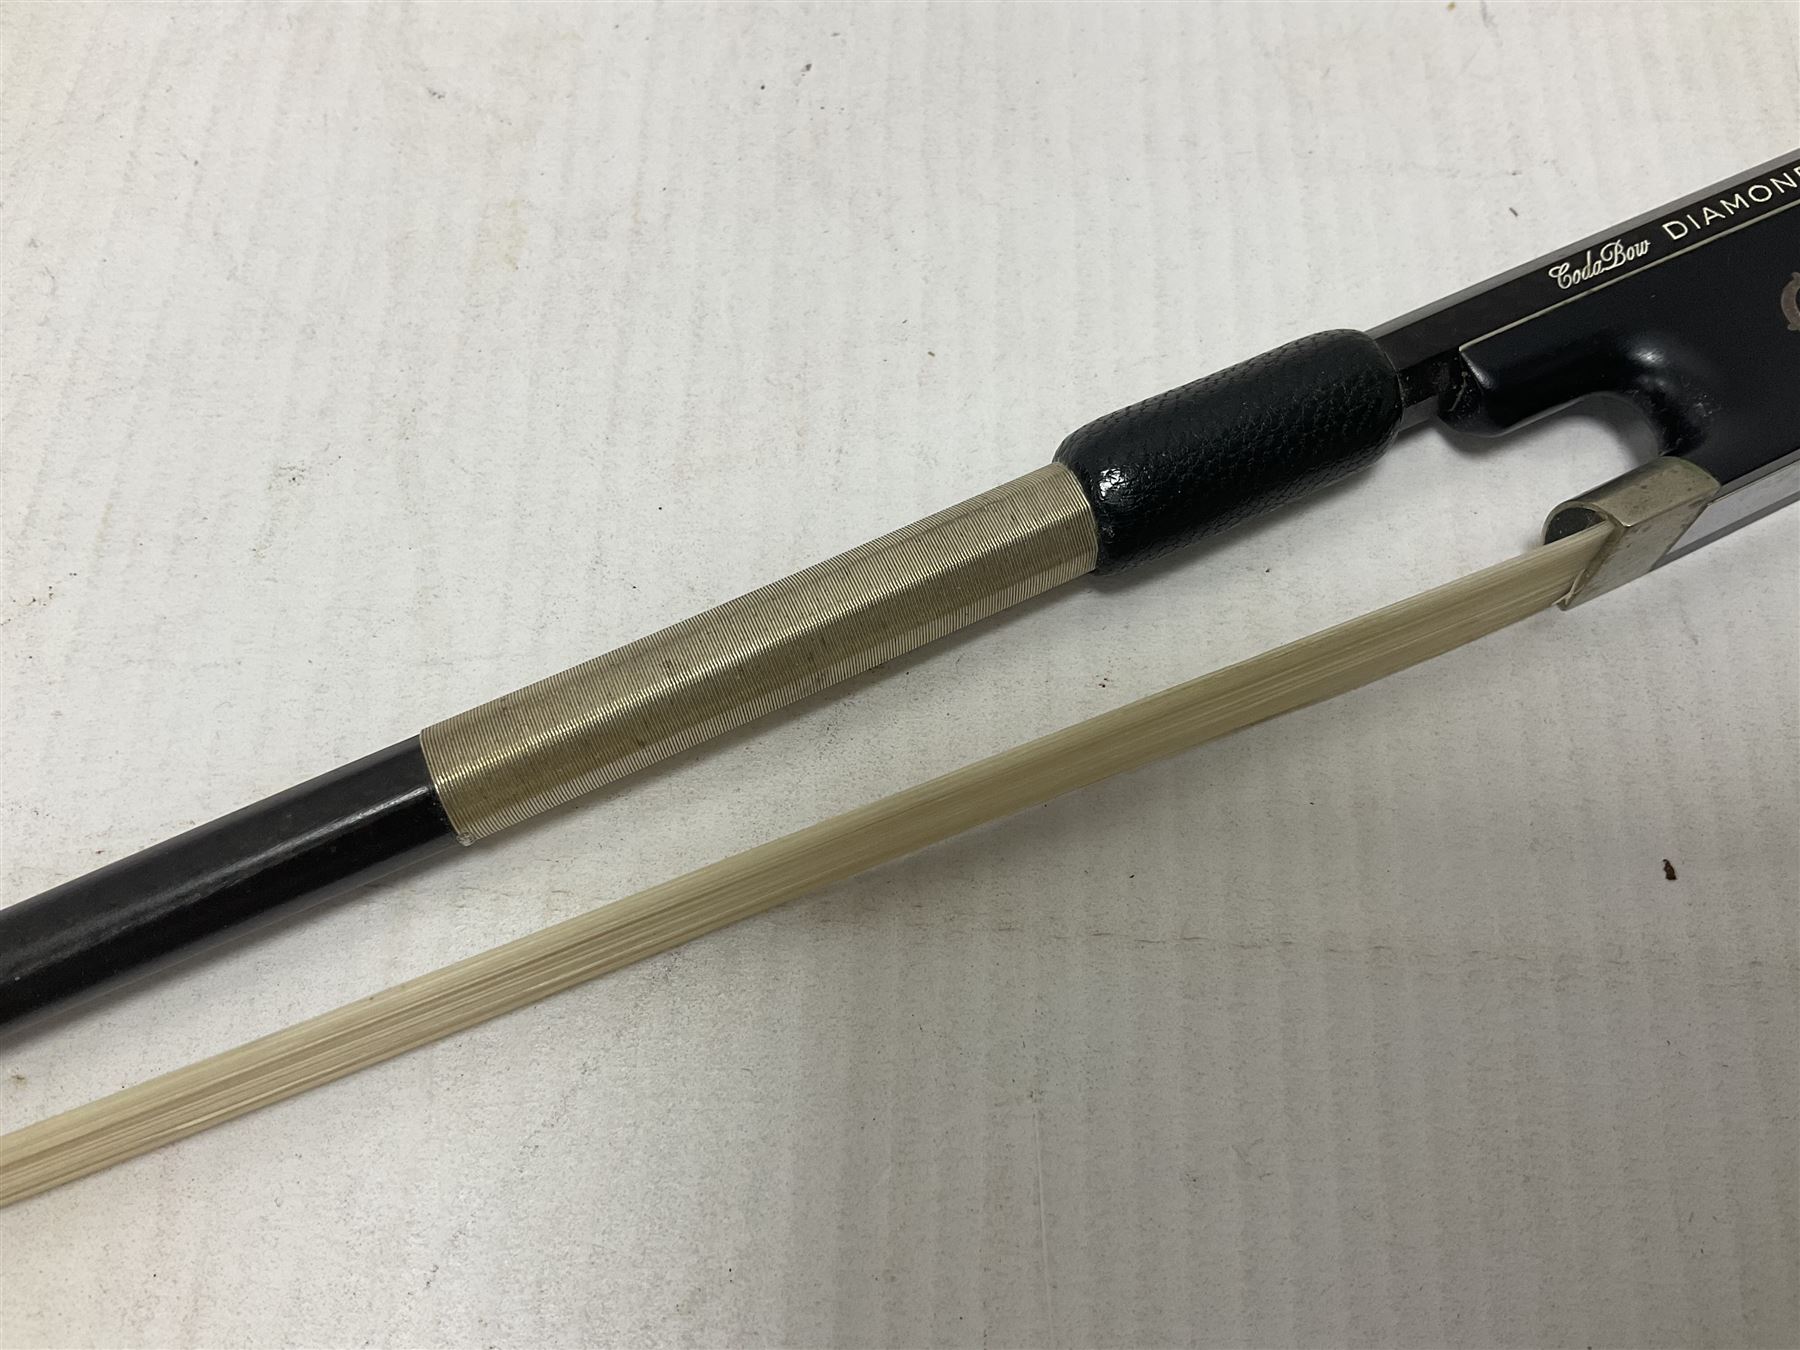 CodaBow Diamond carbon fibre violin bow with Nickel plated fittings - Image 8 of 13